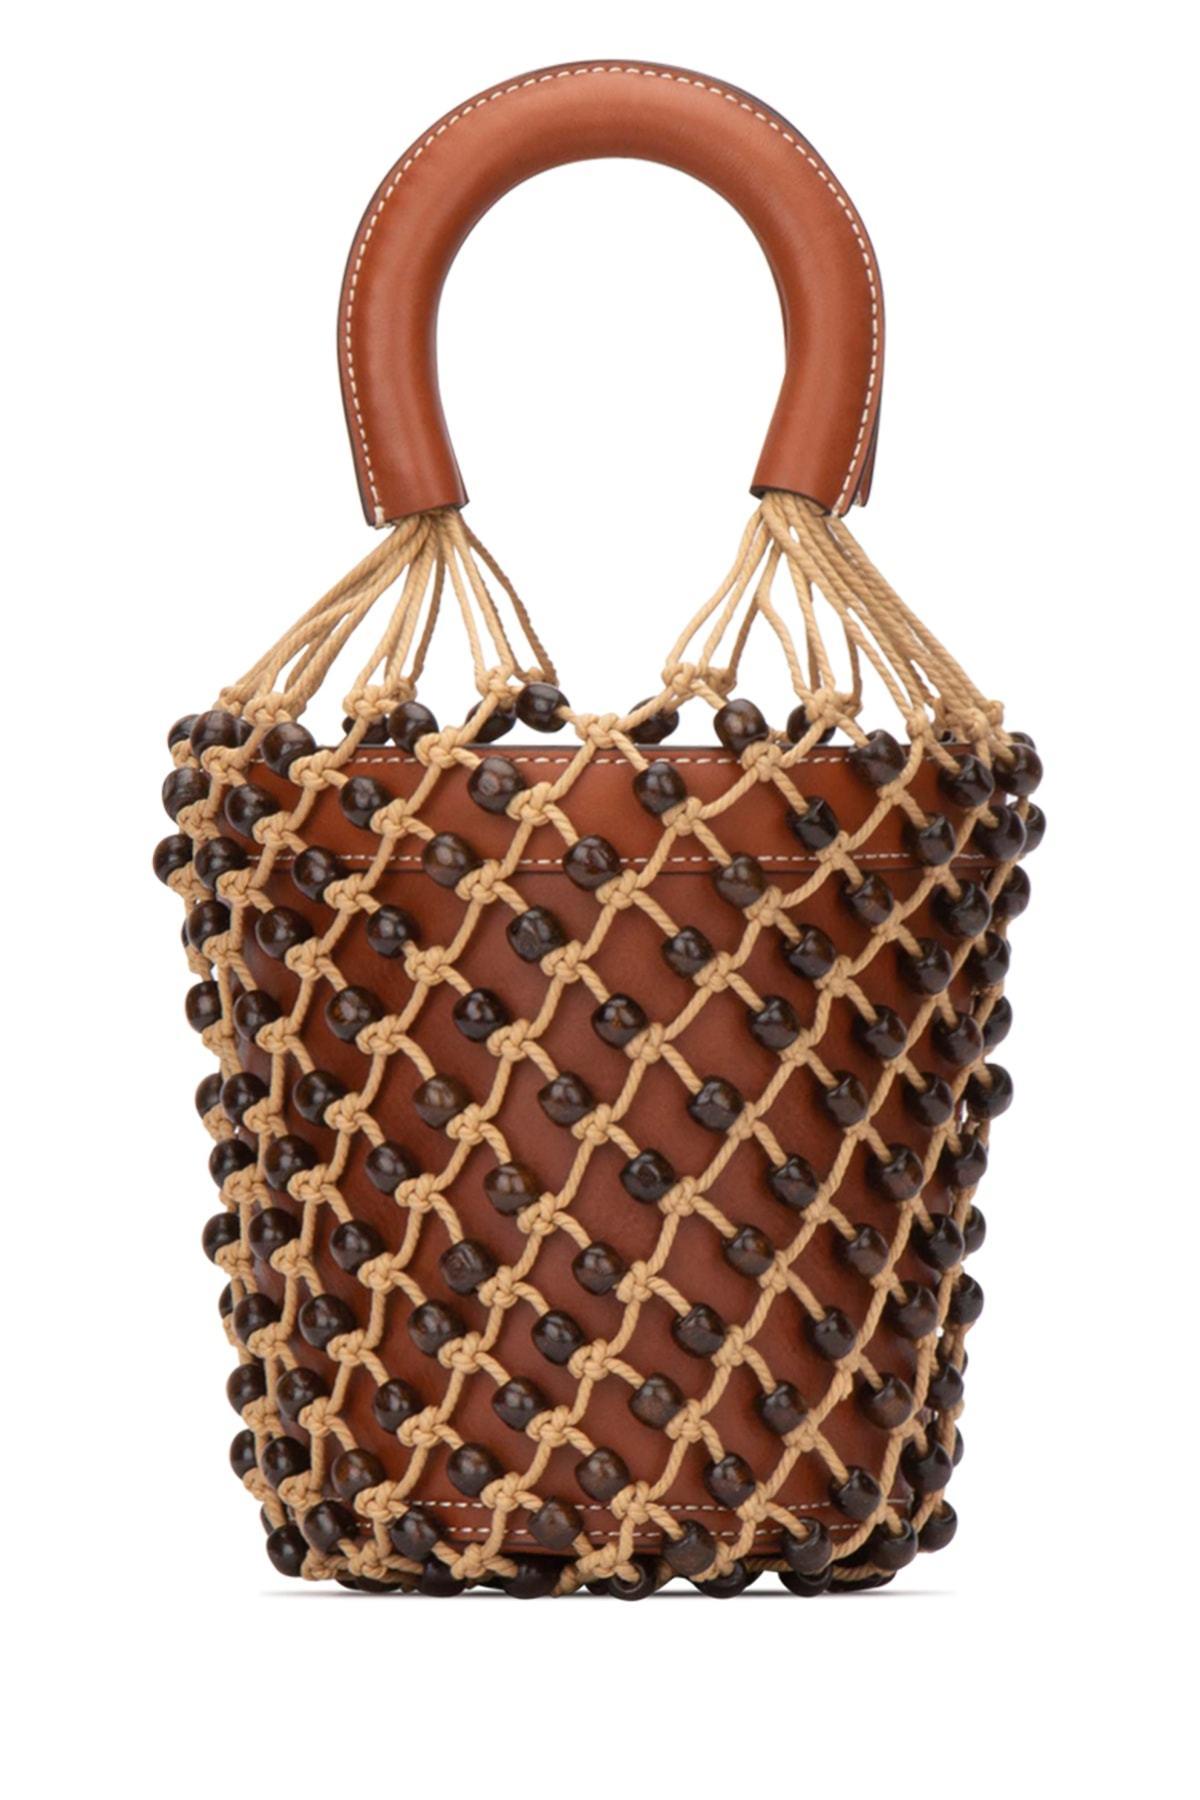 STAUD Leather Moreau Bucket Bag in Brown - Lyst